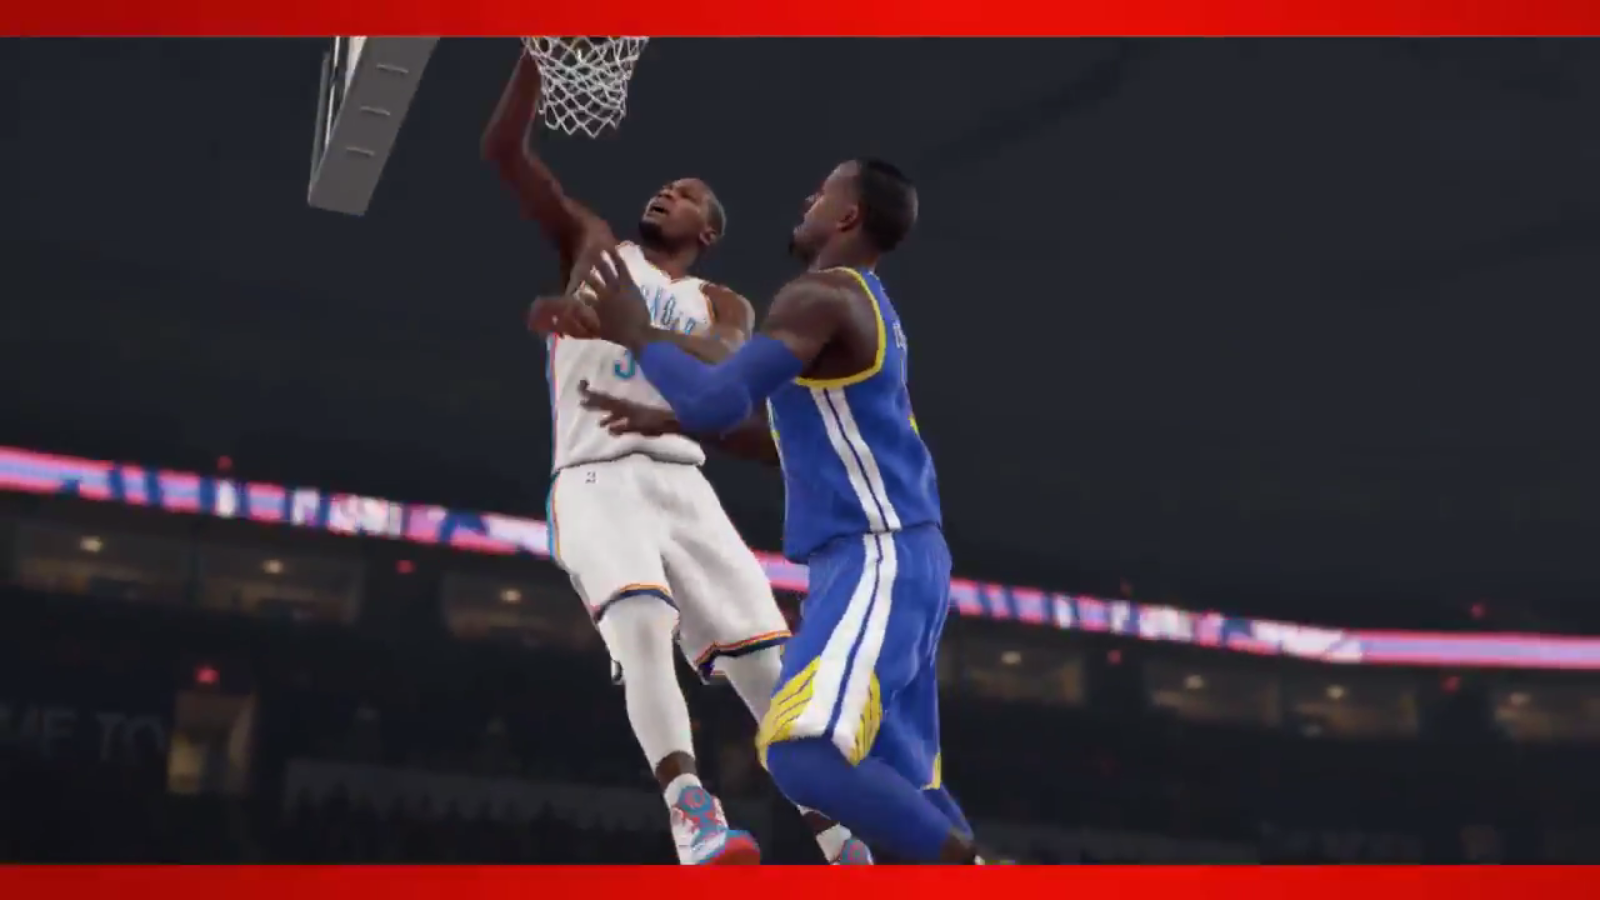 Stealthy Box New NBA 2K15 Teaser Trailer Hits the Court